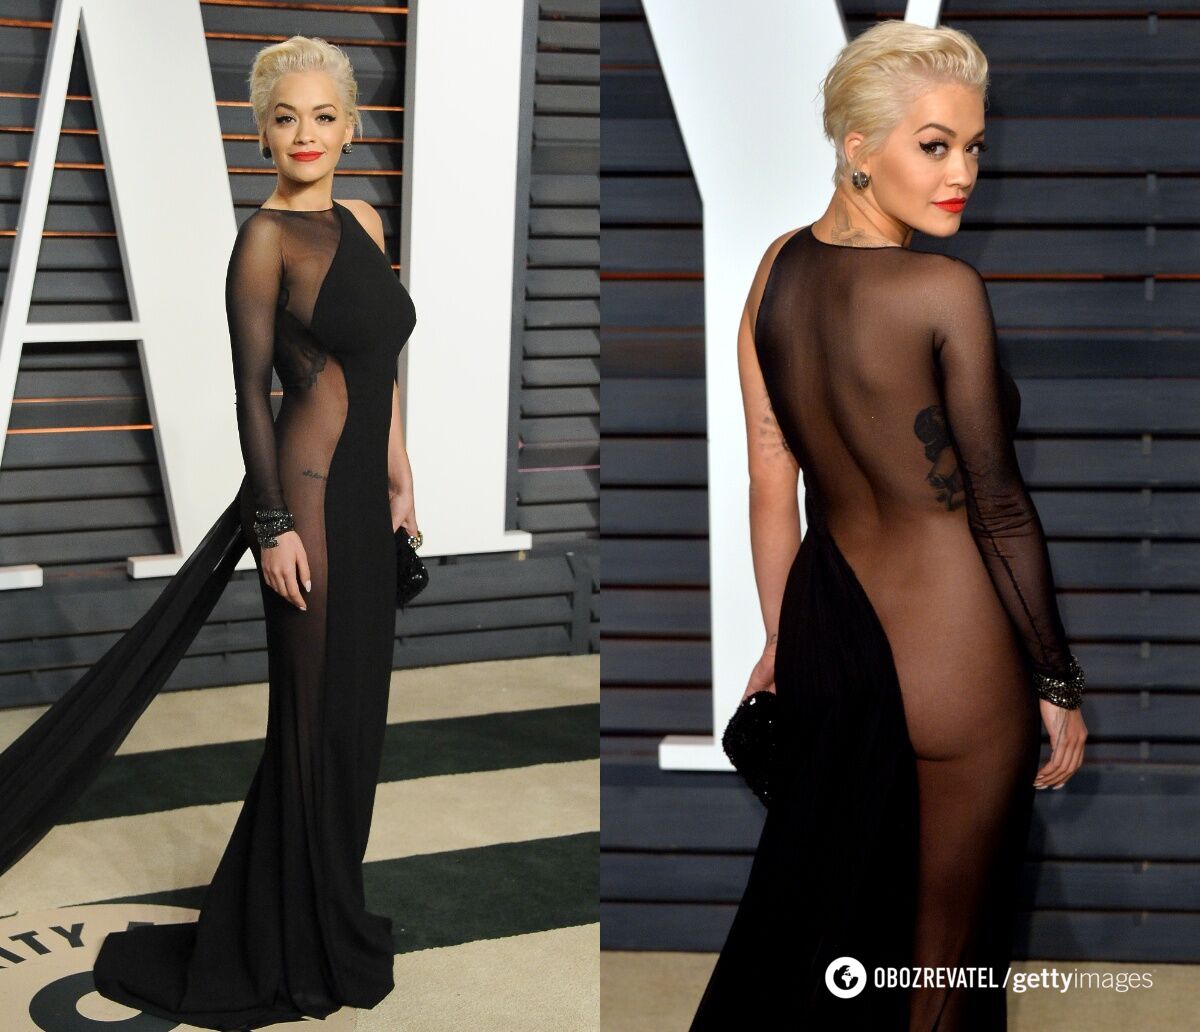 From Marilyn Monroe to Rita Ora: 5 most scandalous dresses in fashion history. Photo.